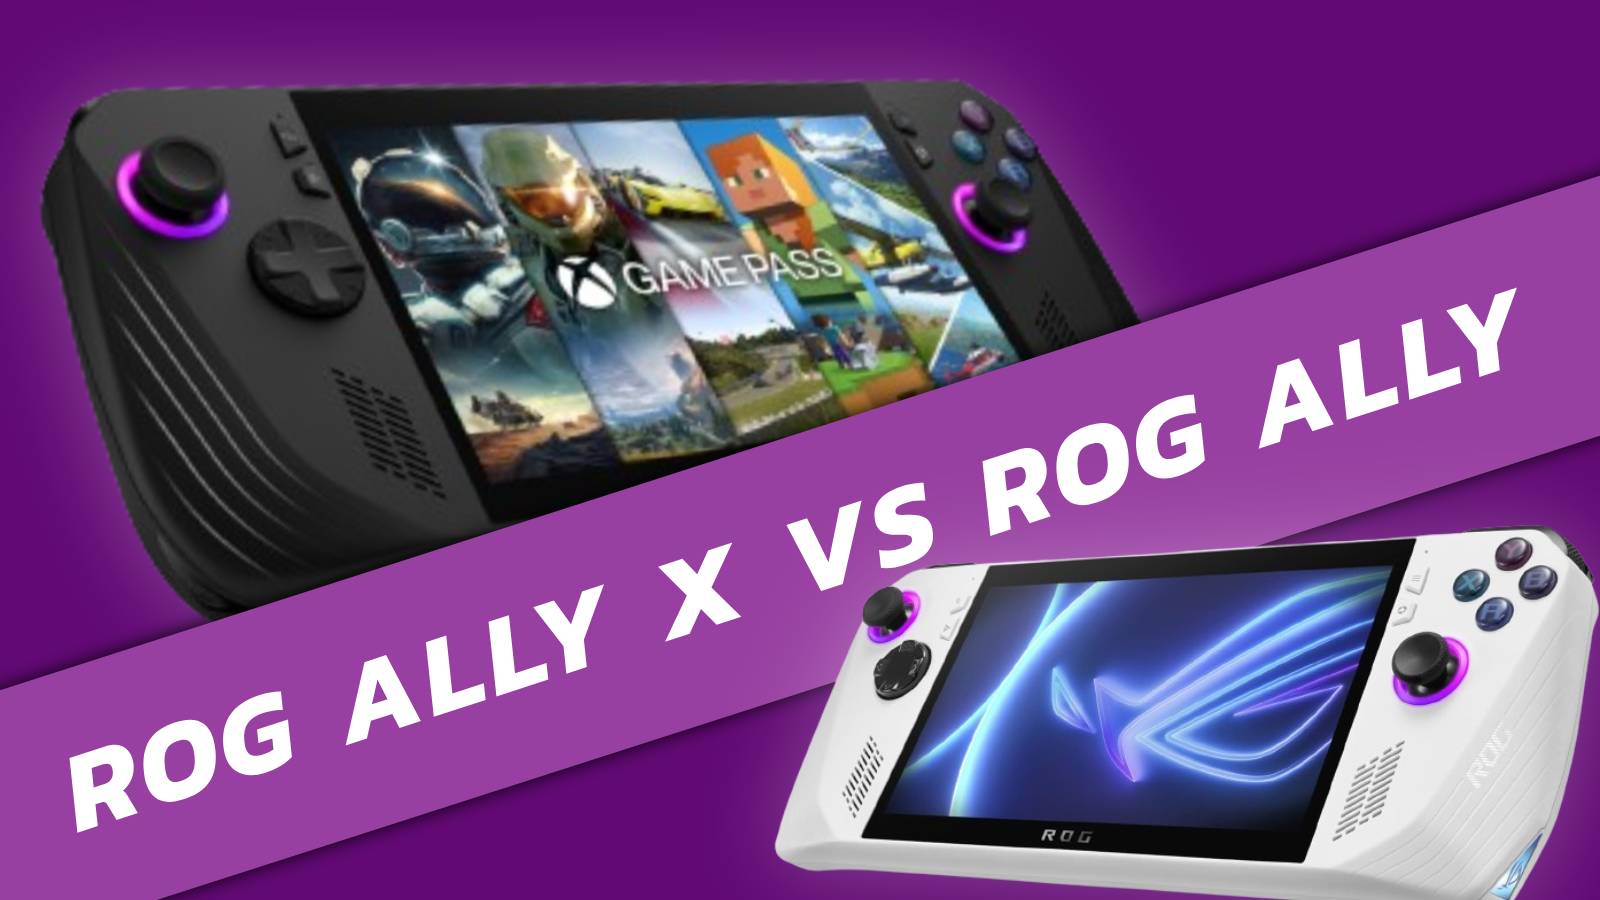 Image of the Asus ROG Ally X and the Asus ROG Ally on a purple background with a purple banner.